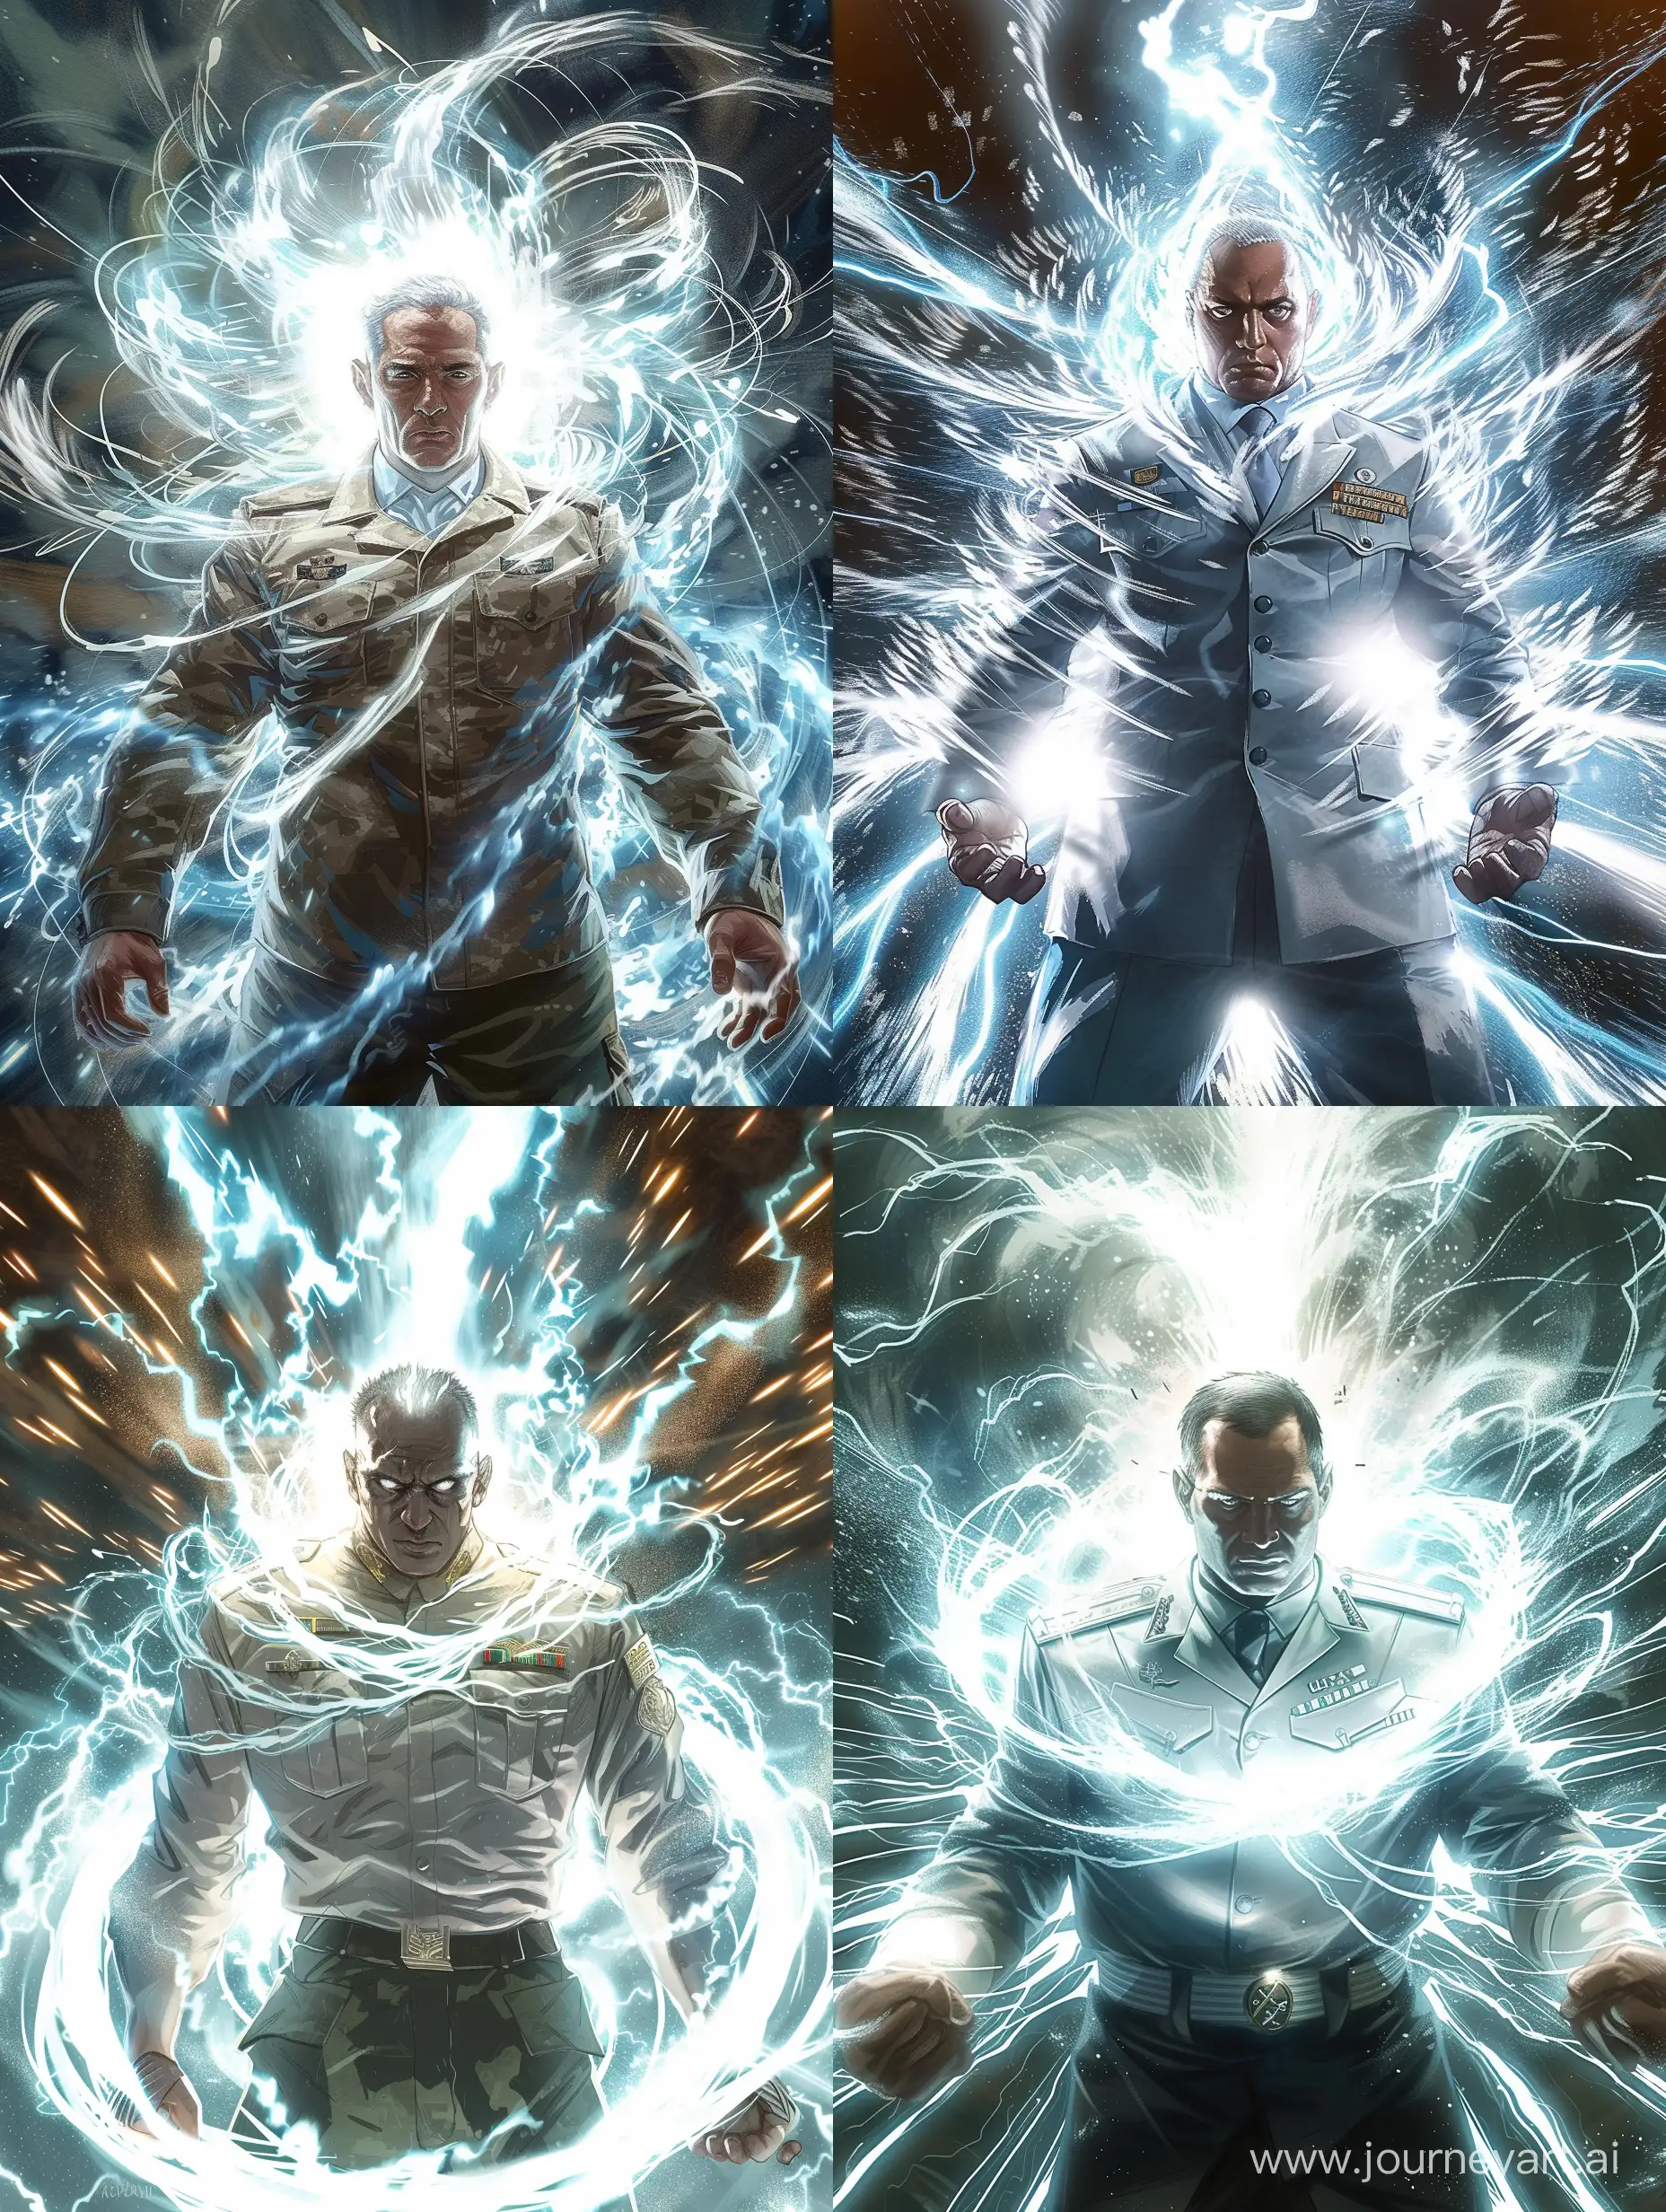 Abdel Fattah El-Sisi stands in the center of a swirling vortex of energy, his military uniform transformed into a glowing aura of silver and white, embodying the Ultra Instinct form. His eyes are silver, piercing through the chaos with calm determination. Around him, the air crackles with the raw power of Ultra Instinct, his hair flowing upwards, defying gravity, surrounded by a halo of energy. In front of him, his hands are drawn back to his right side, palms cupped together, gathering a swirling mass of blue and white energy. The energy pulsates and grows, forming a massive Kamehameha wave, ready to be unleashed. 